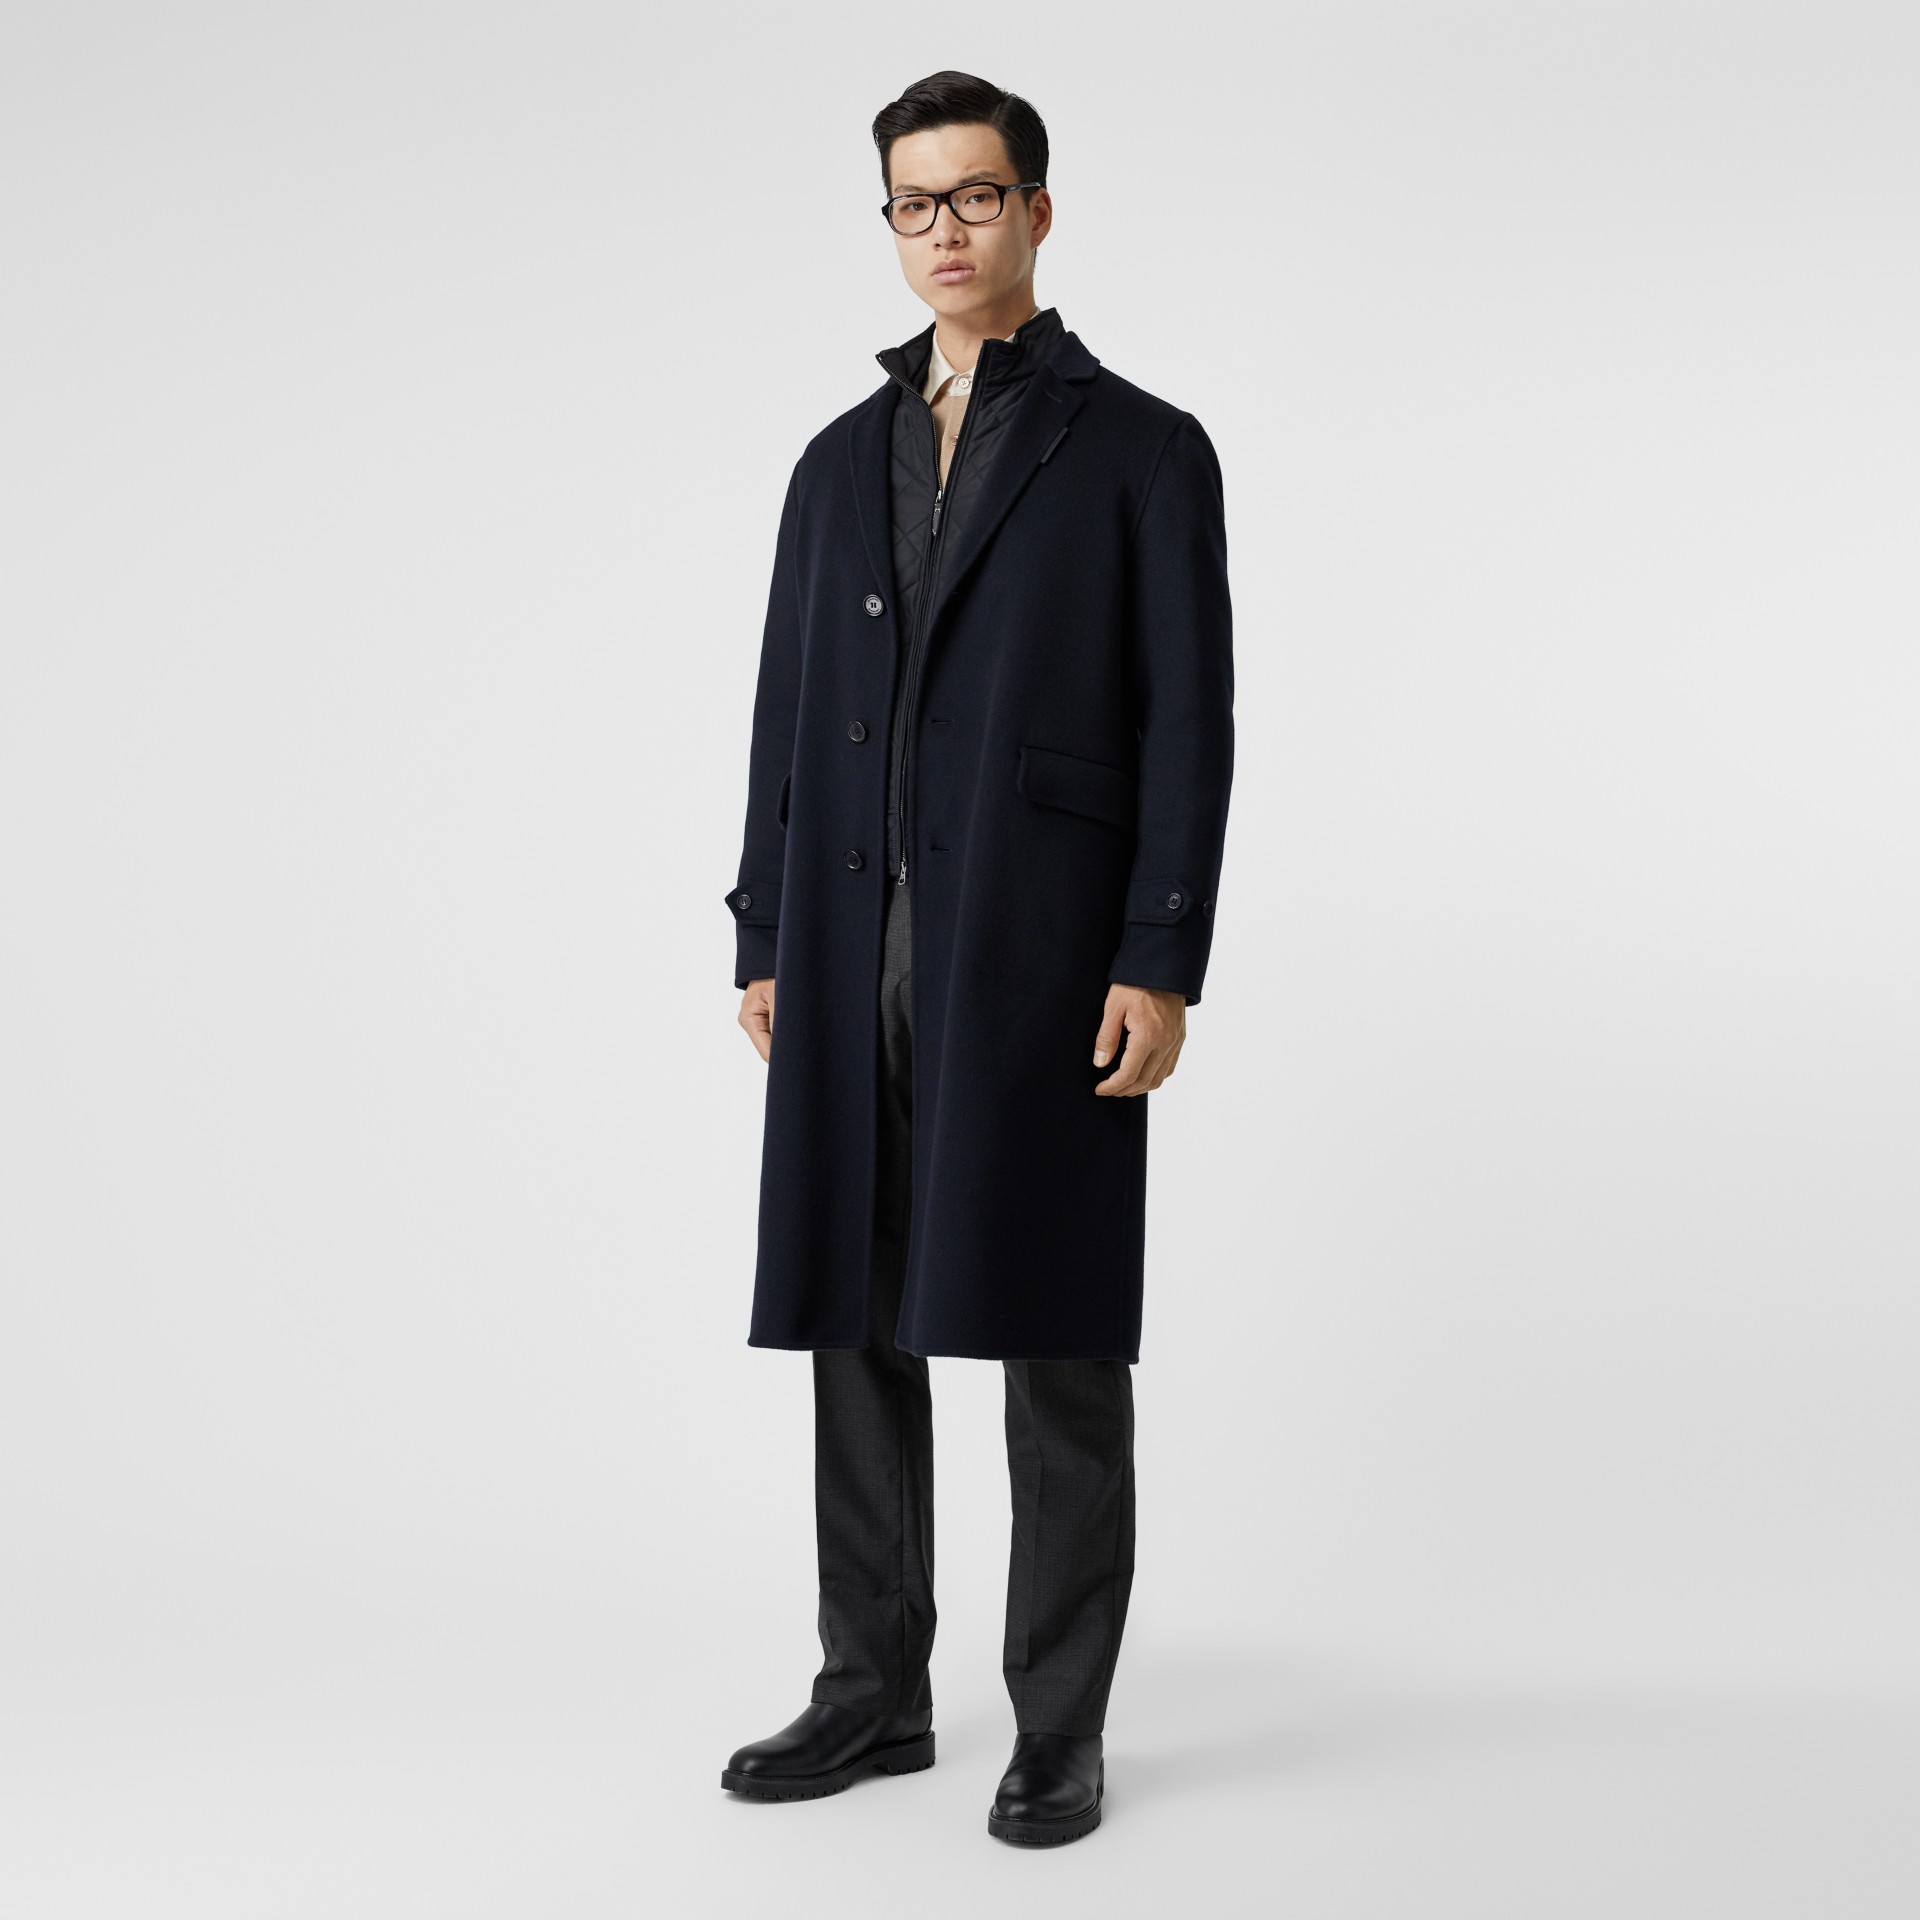 Cashmere Lab Coat in Navy - Men | Burberry United States